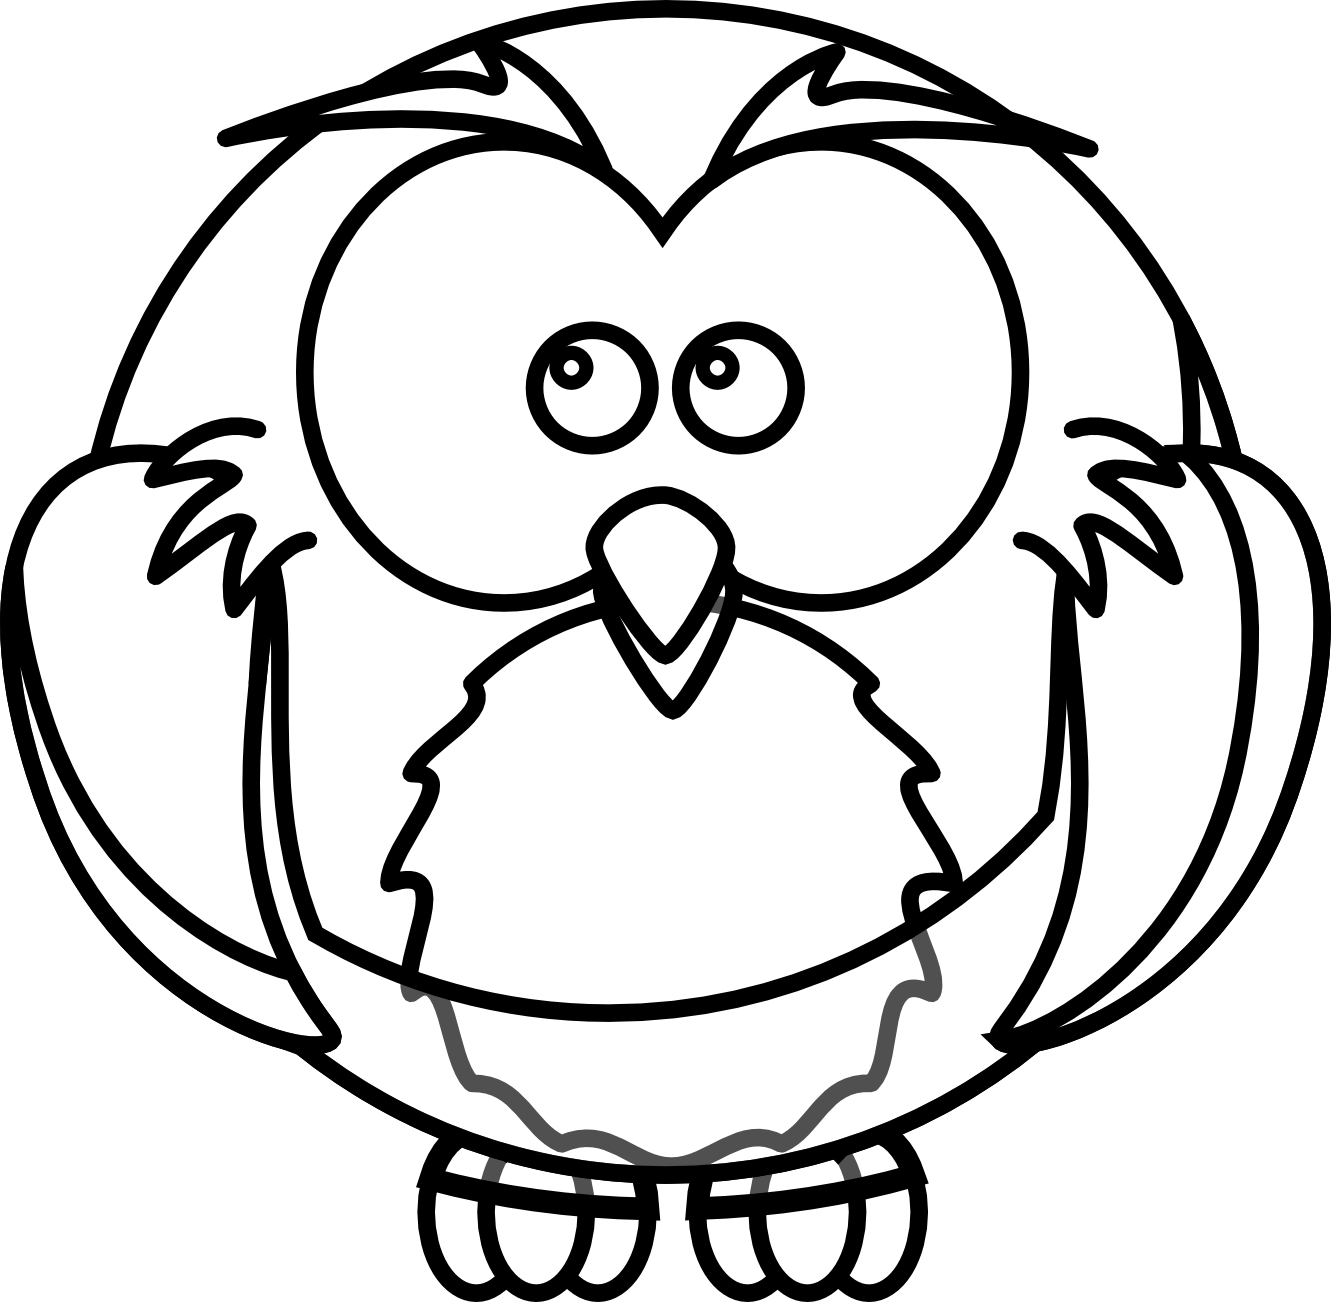 Owls Clipart Black And White Owl. Snowjet.co